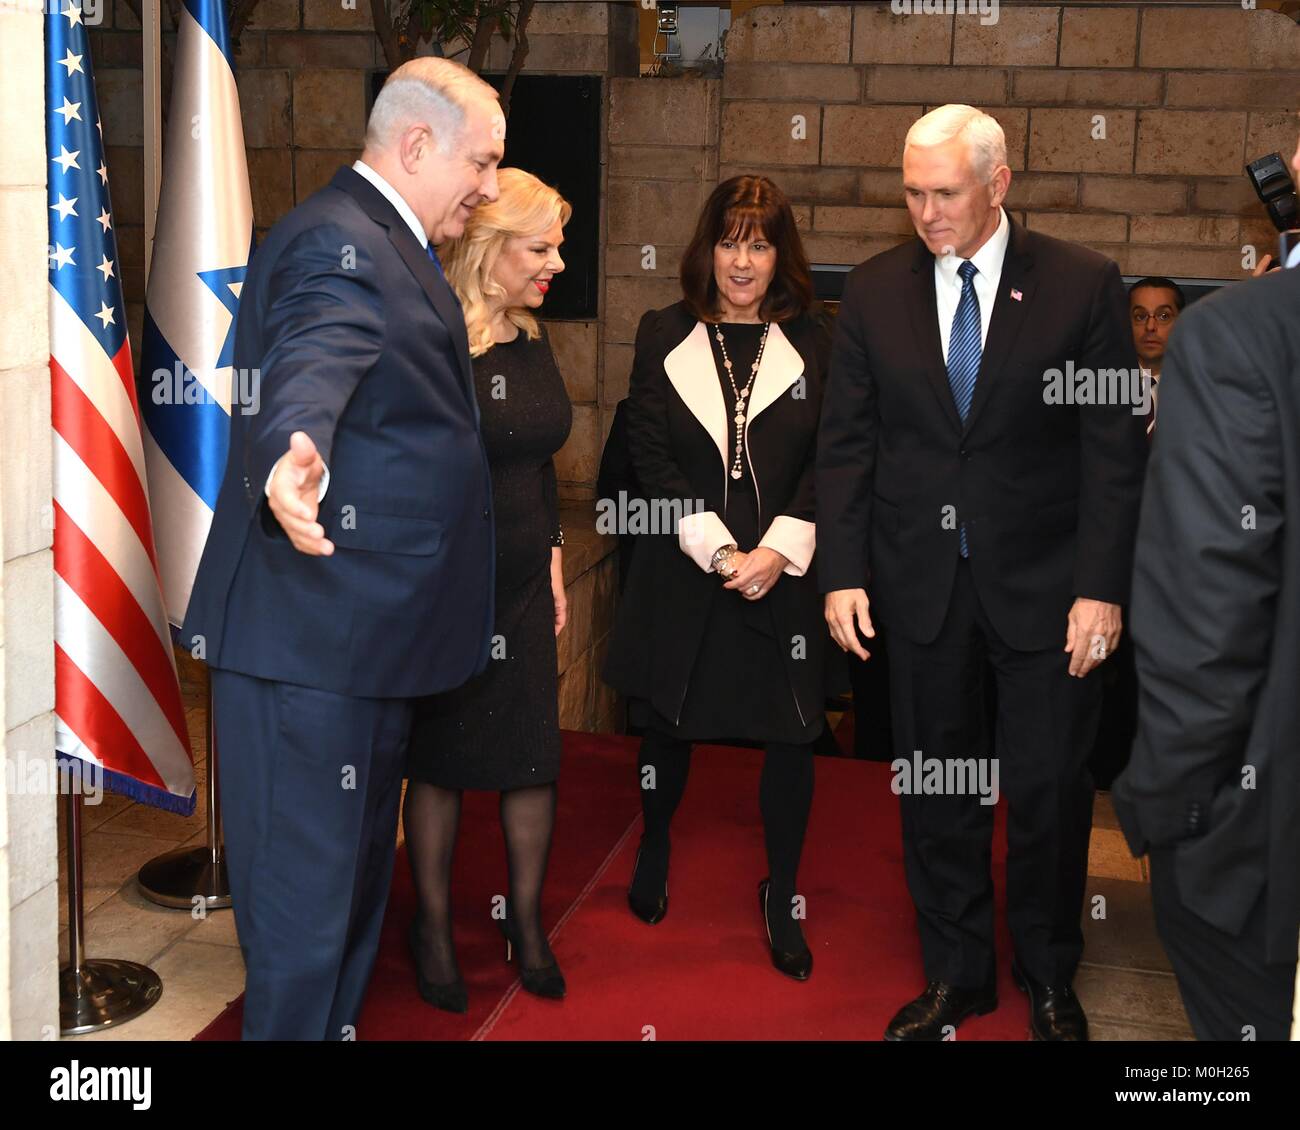 Jerusalem, Israel. 22nd Jan, 2018. U.S. Vice President Mike Pence, right, and wife Karen Pence, center, are welcomed by Israeli Prime Minister Benjamin Netanyahu, left, and his wife Sara Netanyahu before dinner at the Prime Minister's Residence January 22, 2018 in Jerusalem, Israel. Credit: Planetpix/Alamy Live News Stock Photo